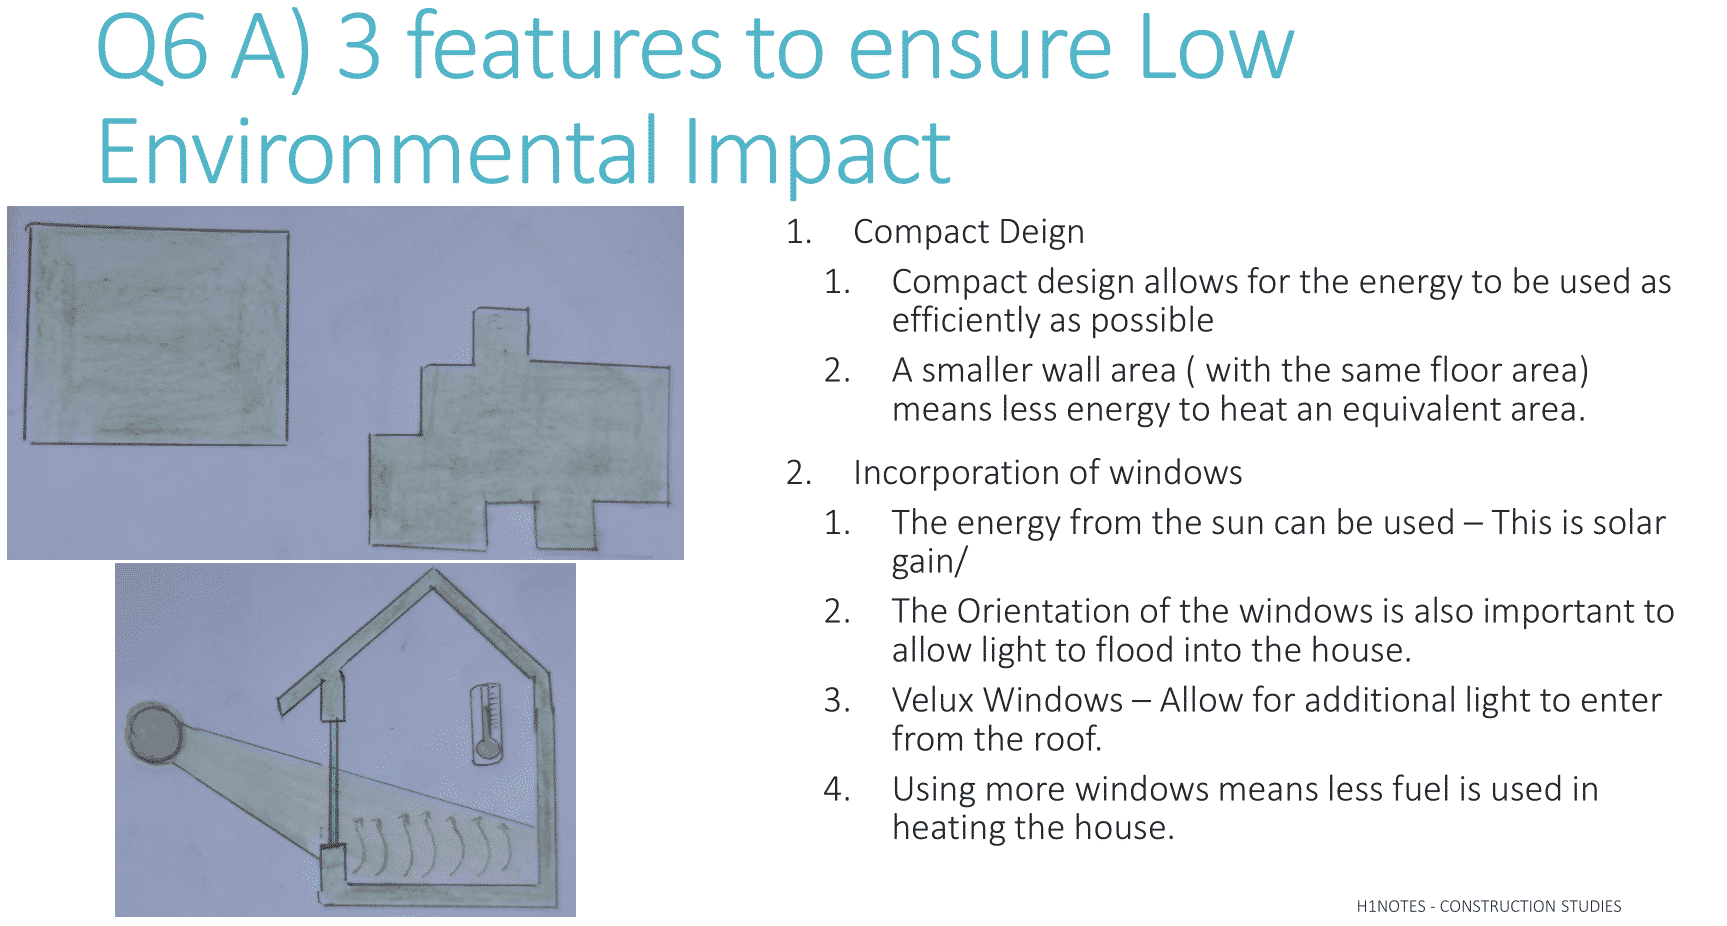 Q6)a - Features to ensure low Environmental Impact - Construction Studies